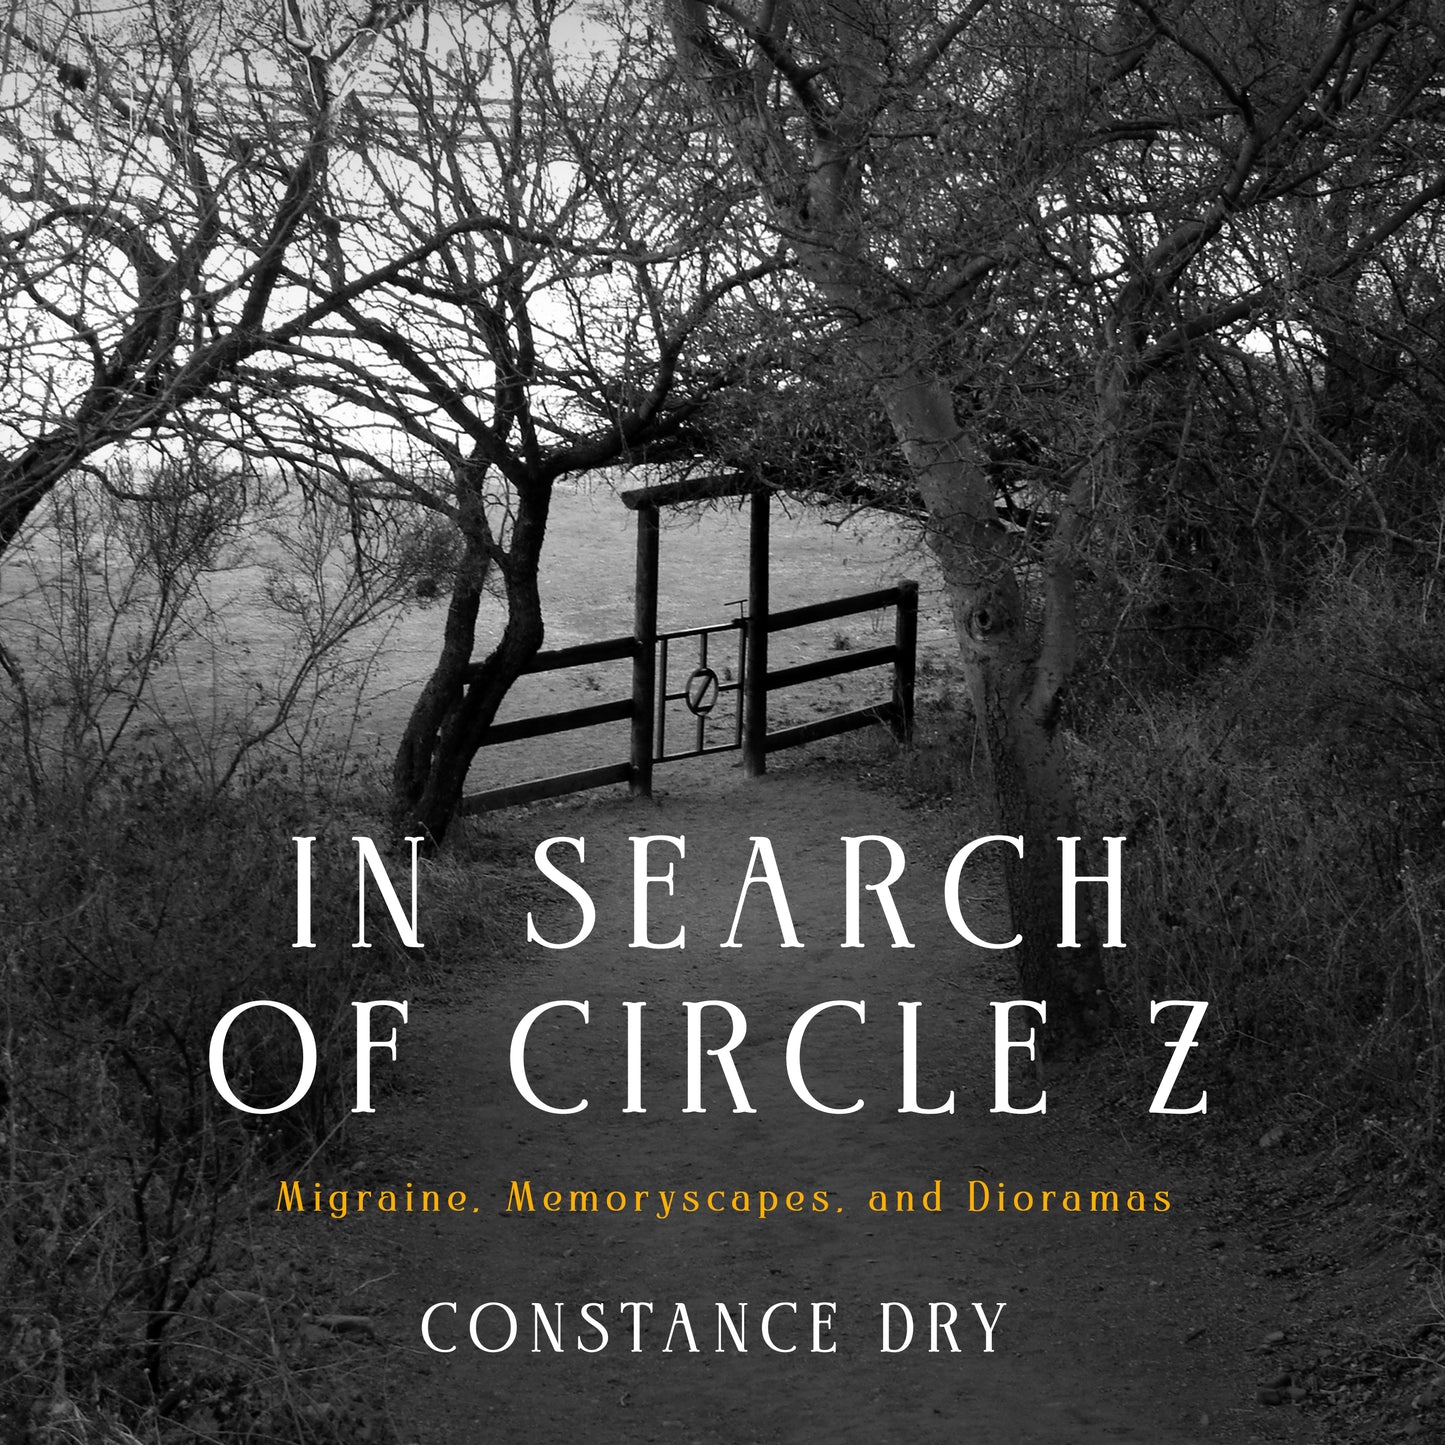 In Search of Circle Z